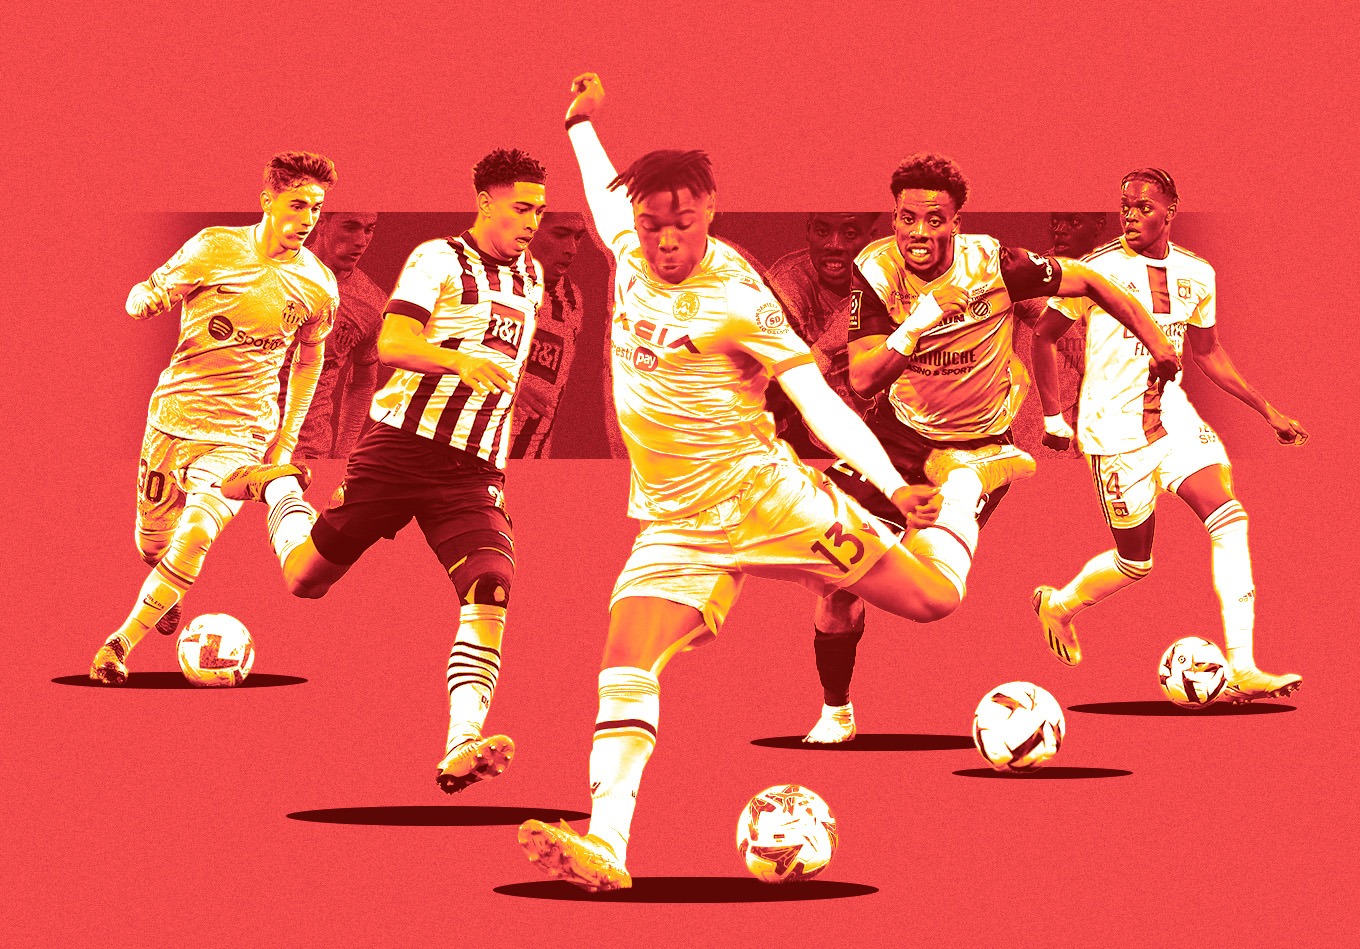 Electric Youth: How Much Faith Does Your Club Show in Young Players?